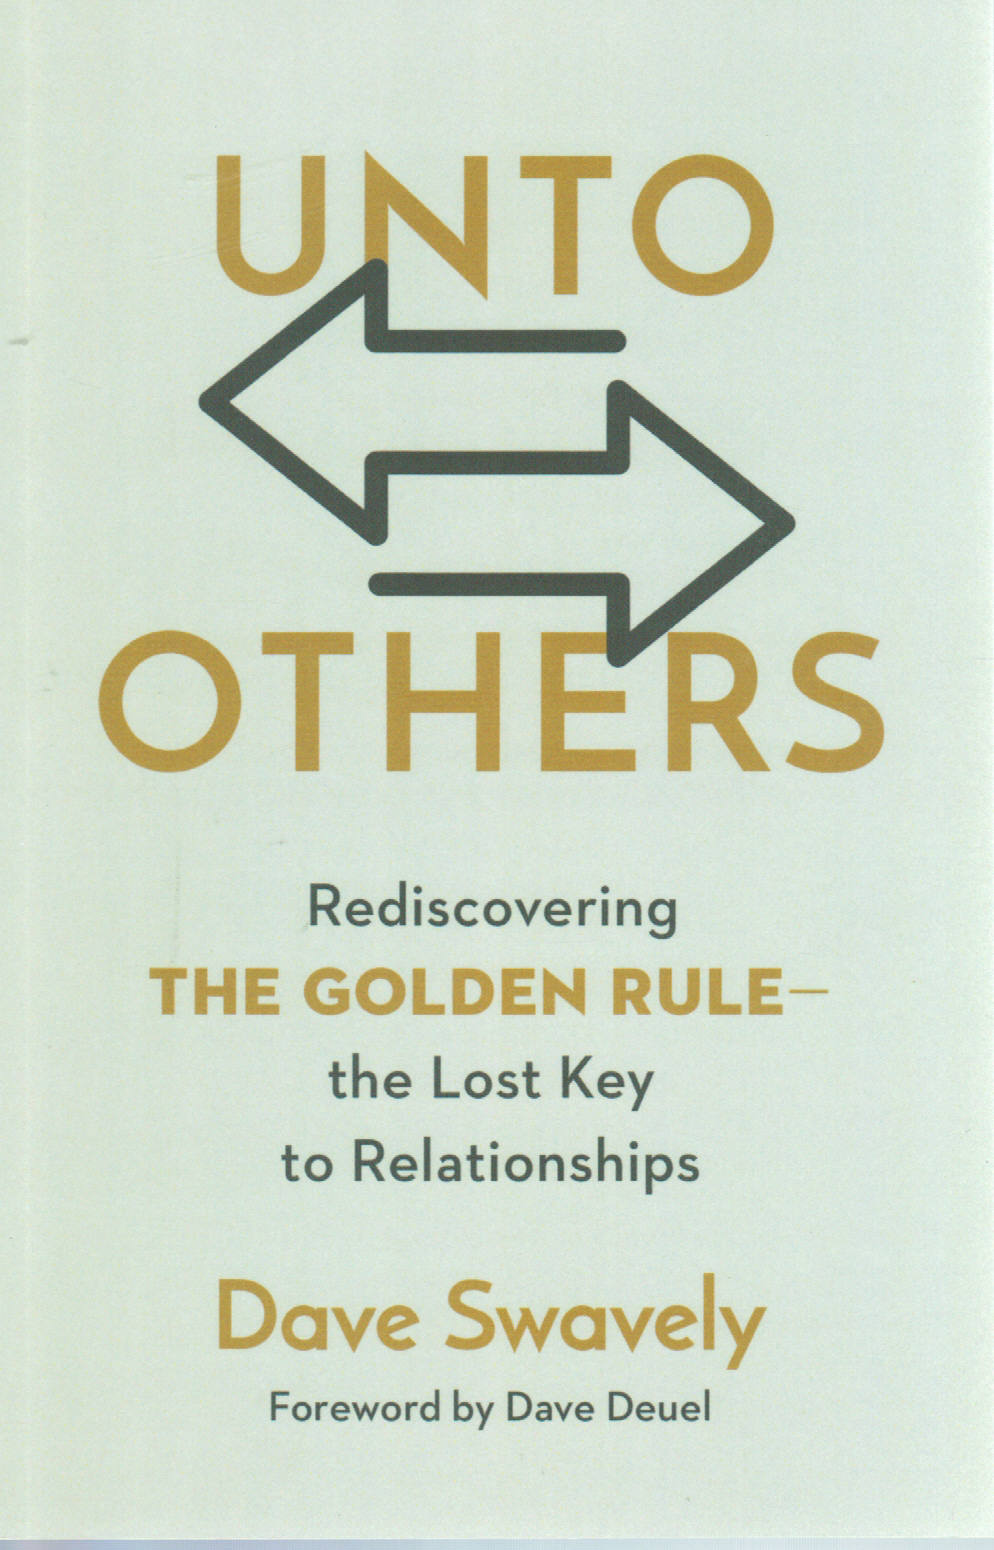 Unto Others: Rediscovering the Golden Rule – the Lost Key to Relationships